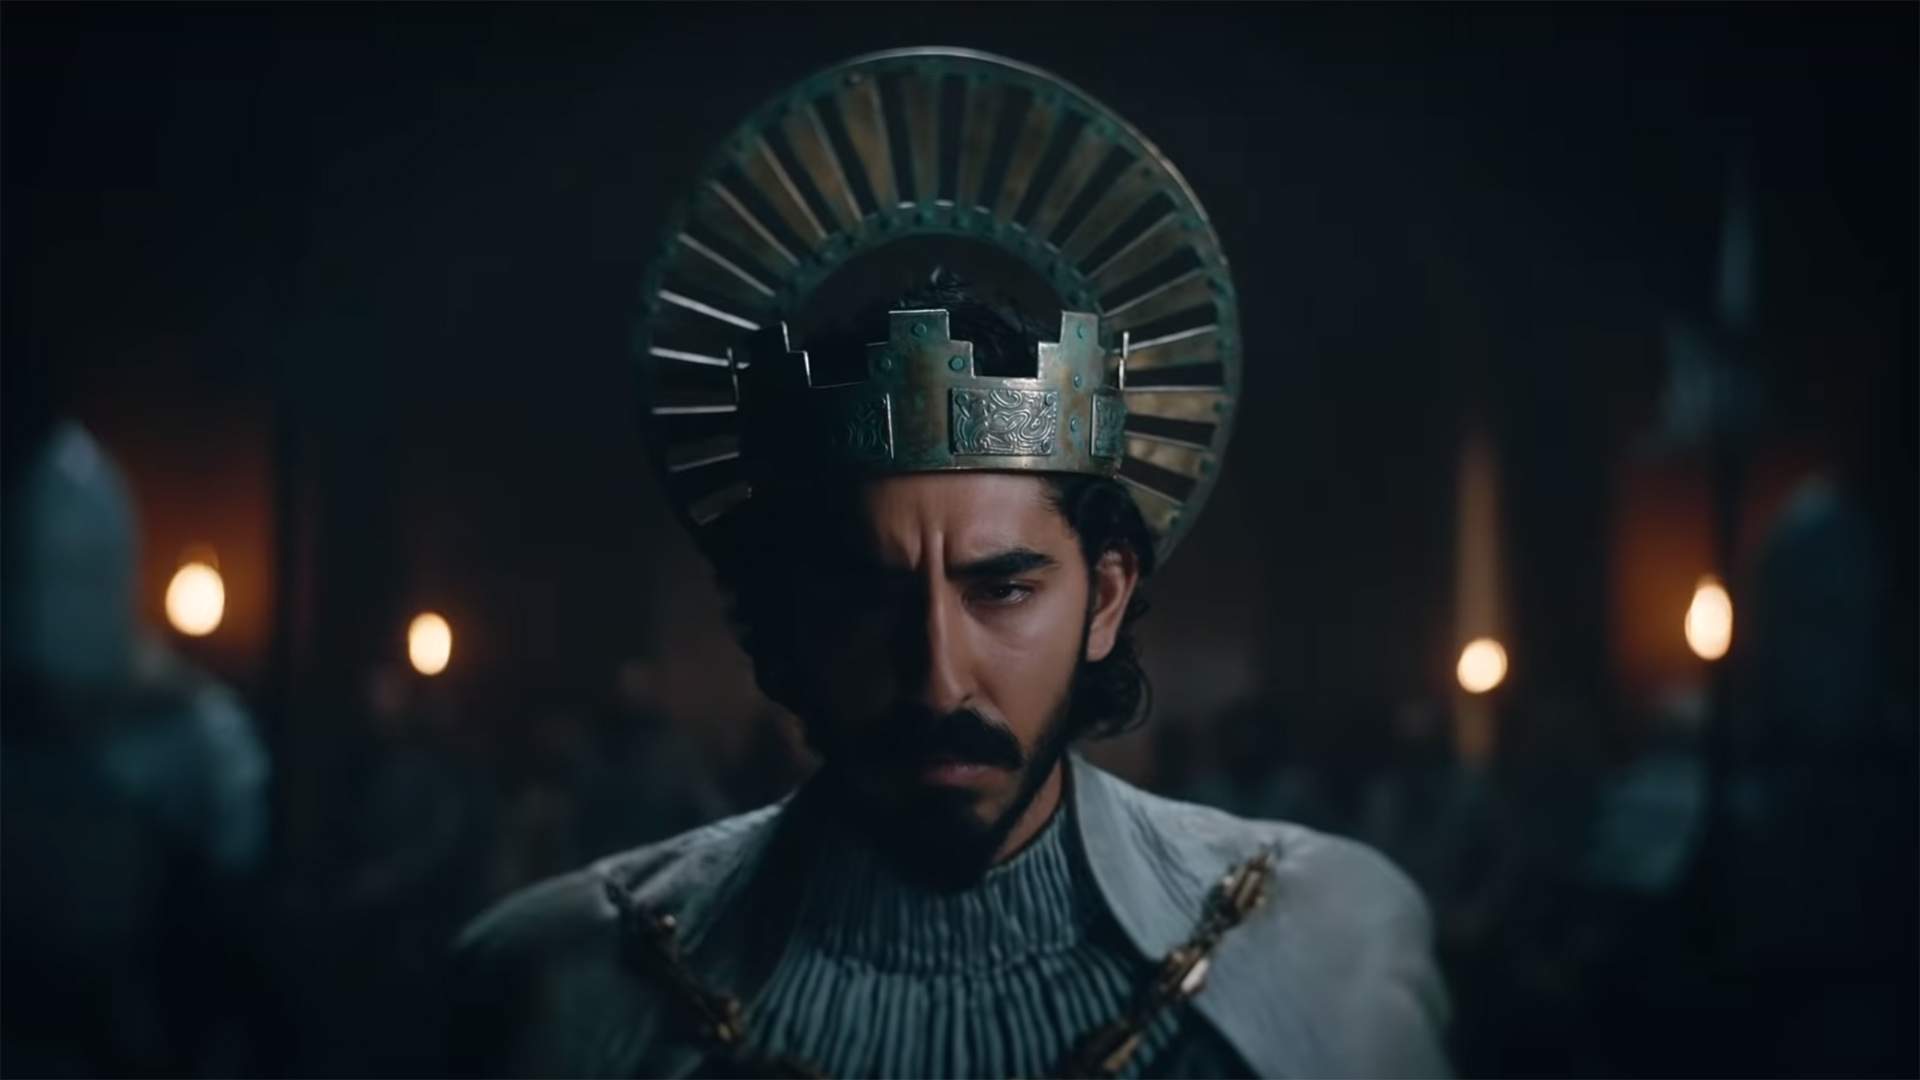 Dev Patel Goes Medieval in the Unsettling First Teaser for 'The Green Knight'